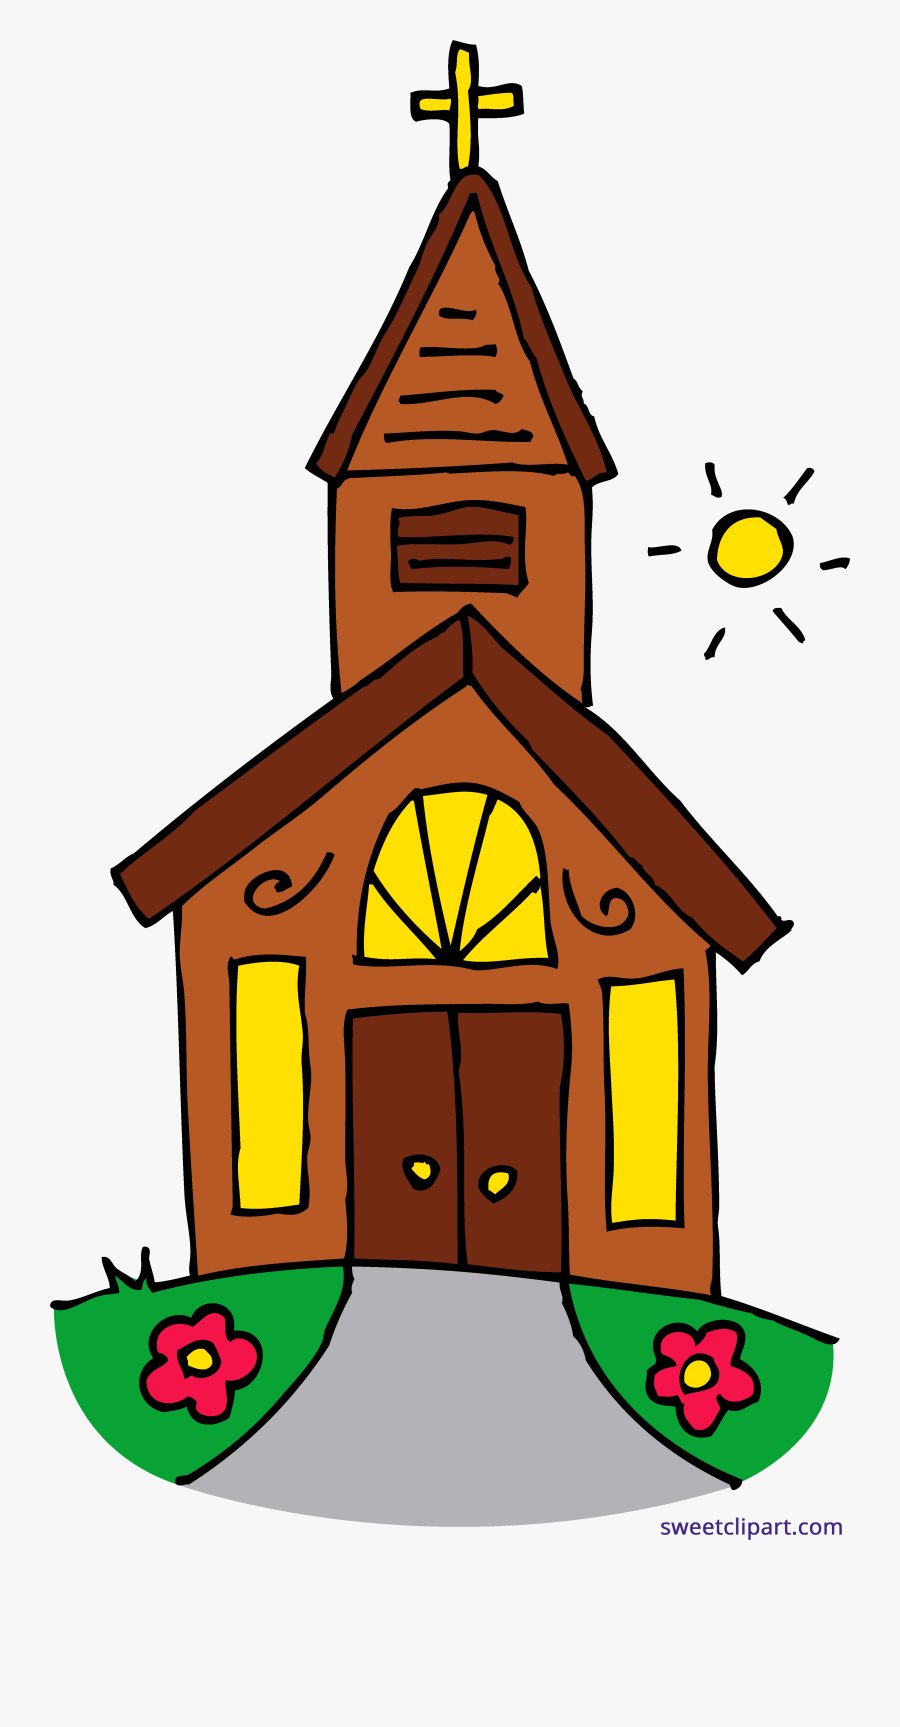 Little Church On A Sunny Day - Transparent Background Church Clipart, Transparent Clipart